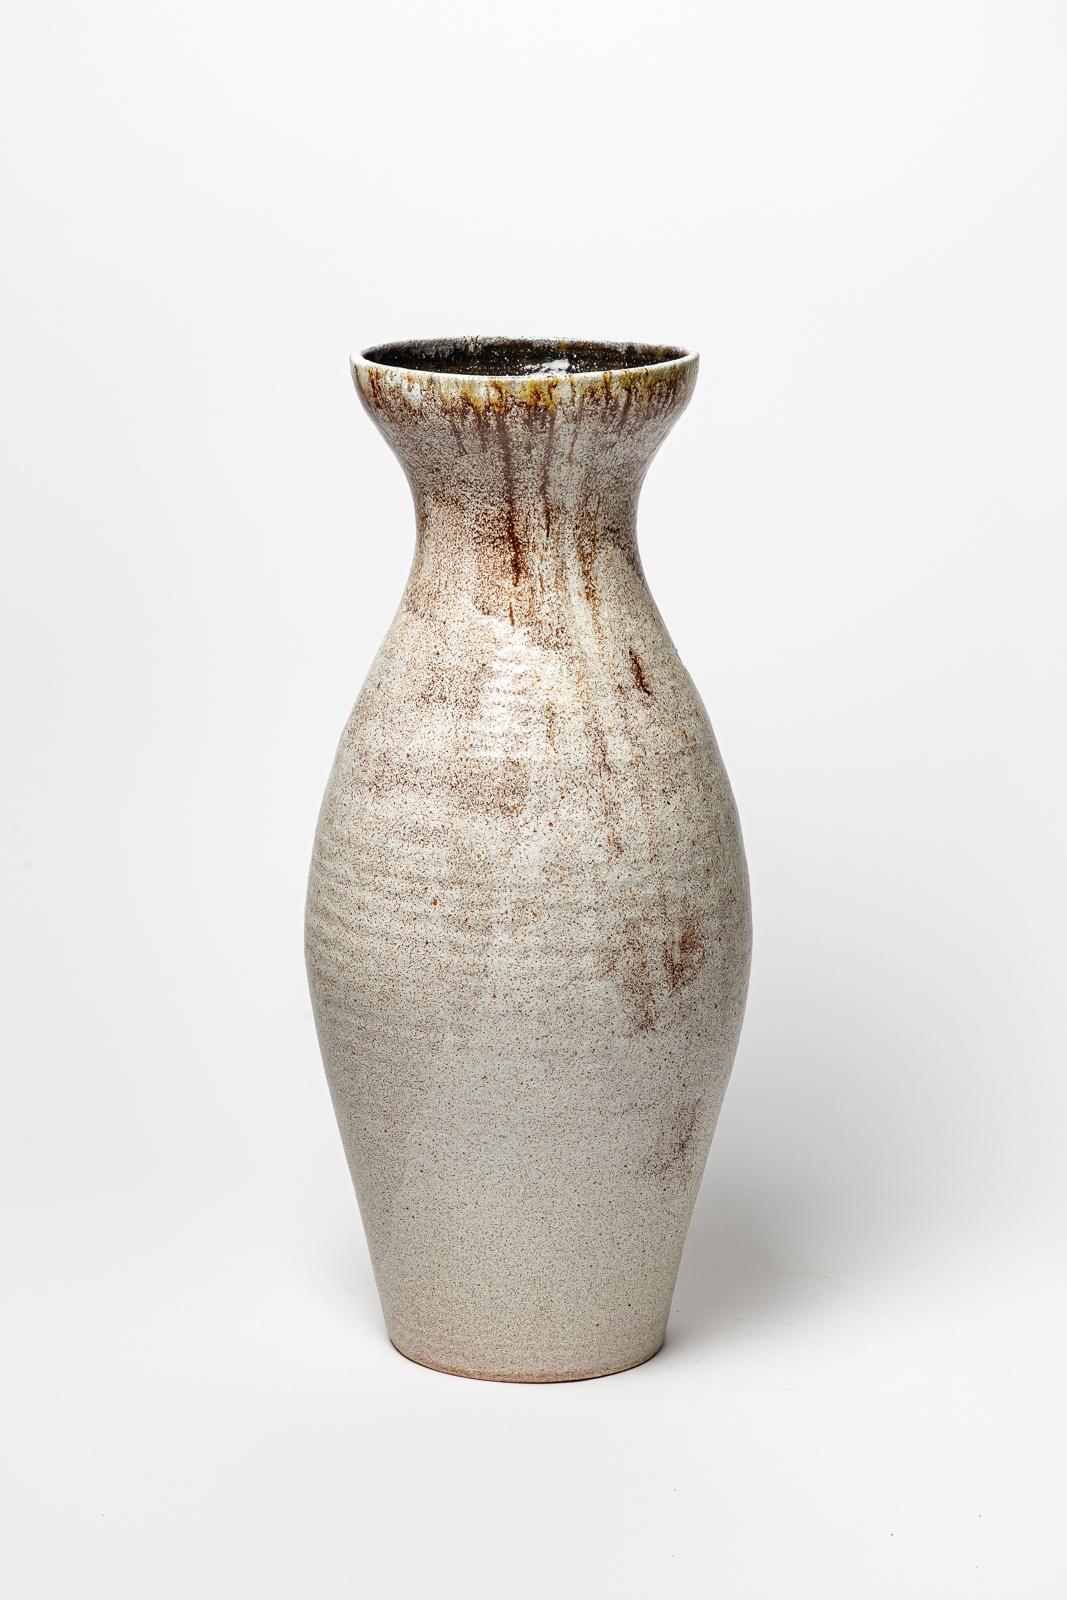 French White glazed stoneware vase by Accolay, circa 1960-1970. For Sale